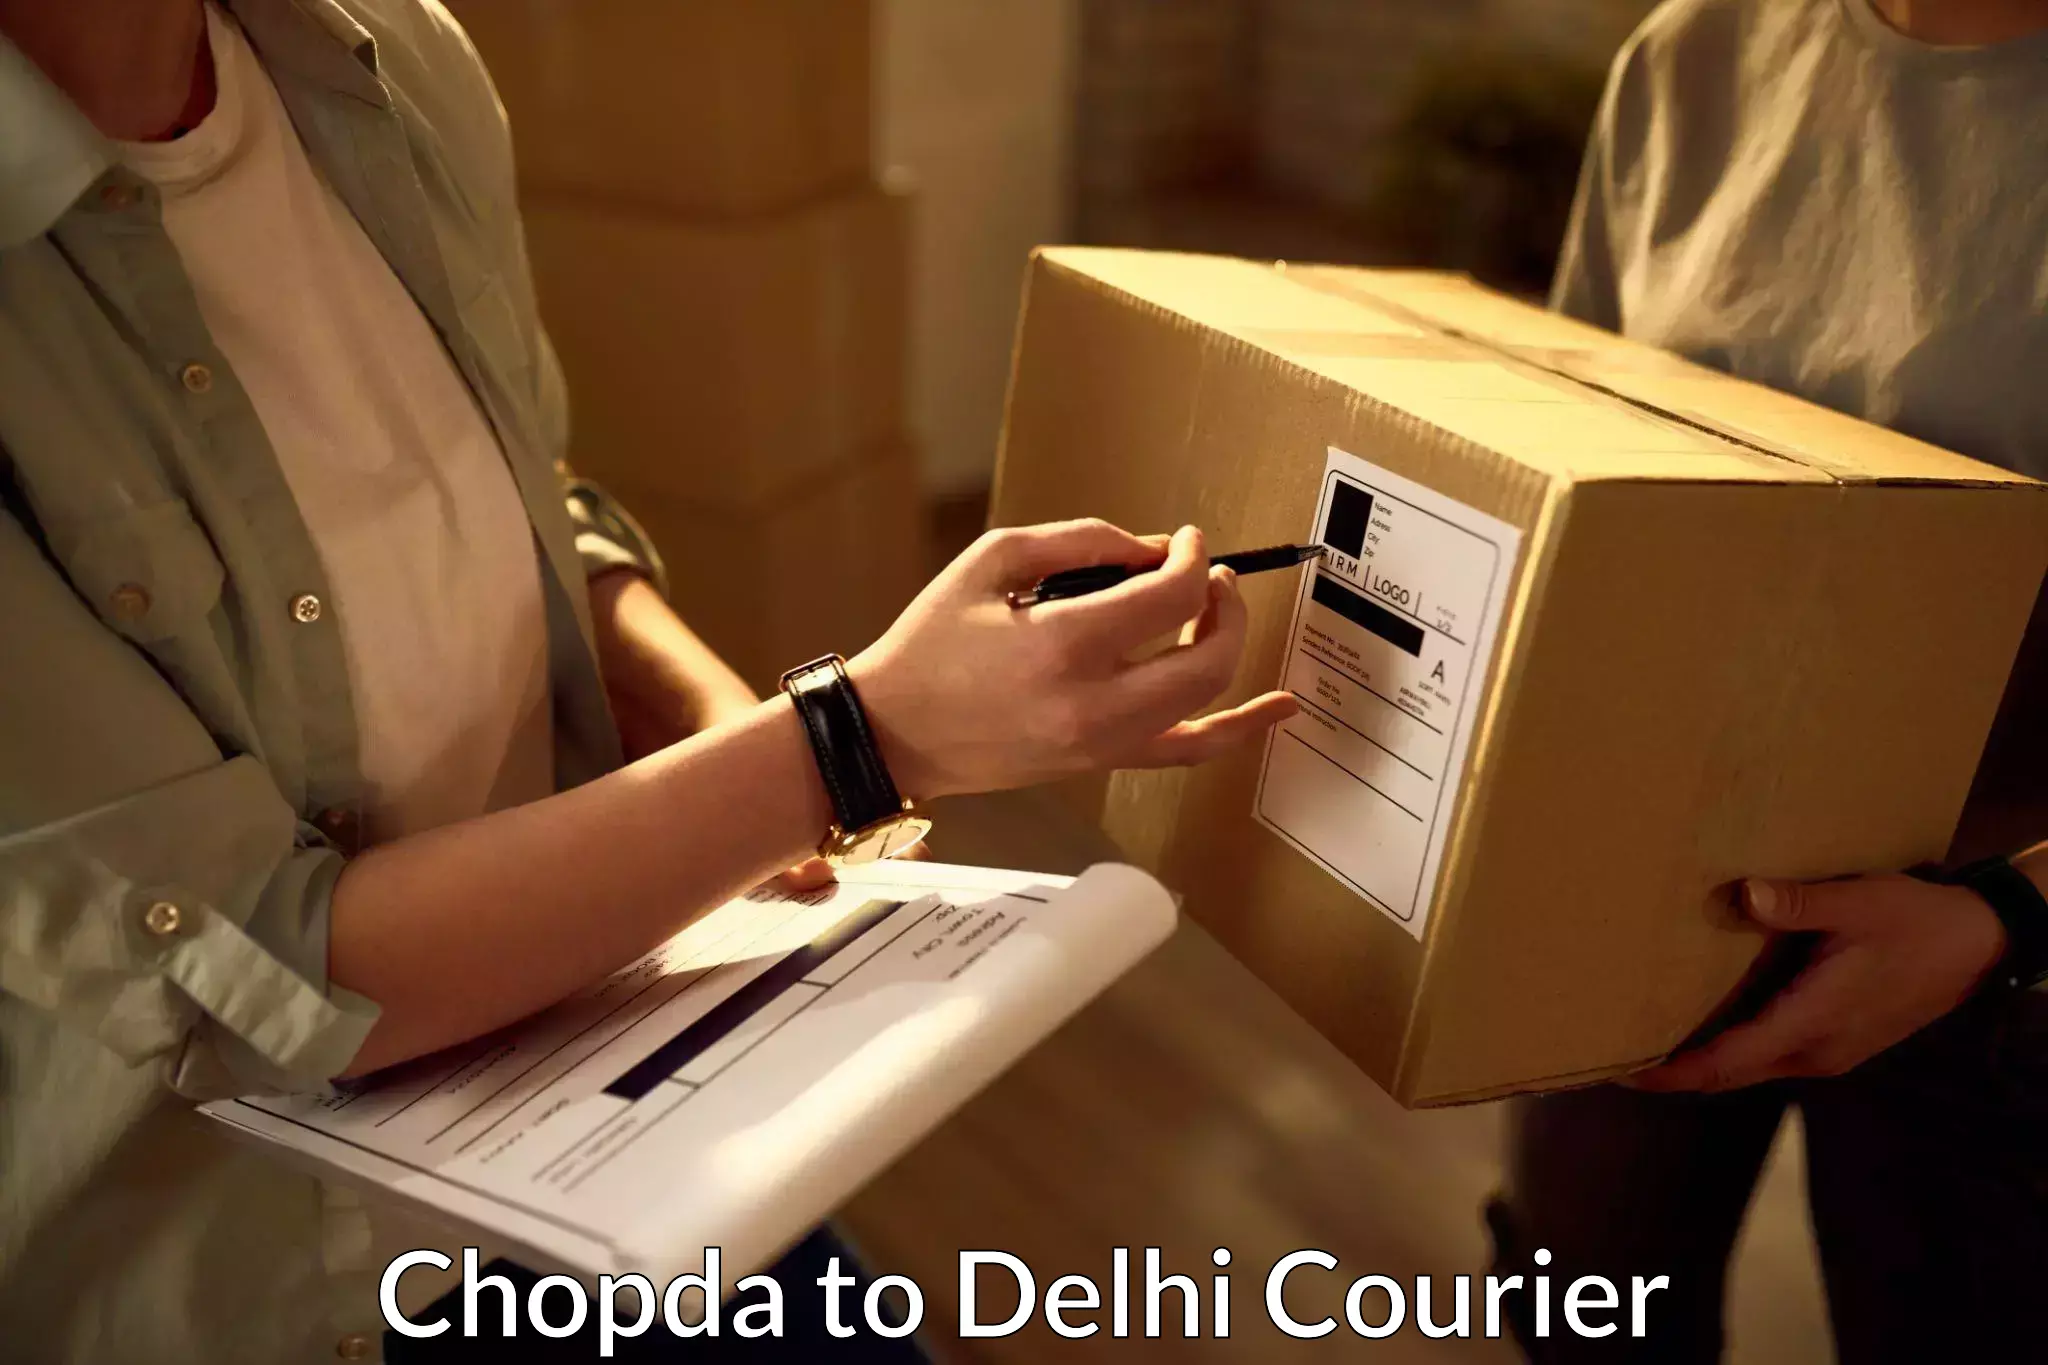 State-of-the-art courier technology Chopda to East Delhi